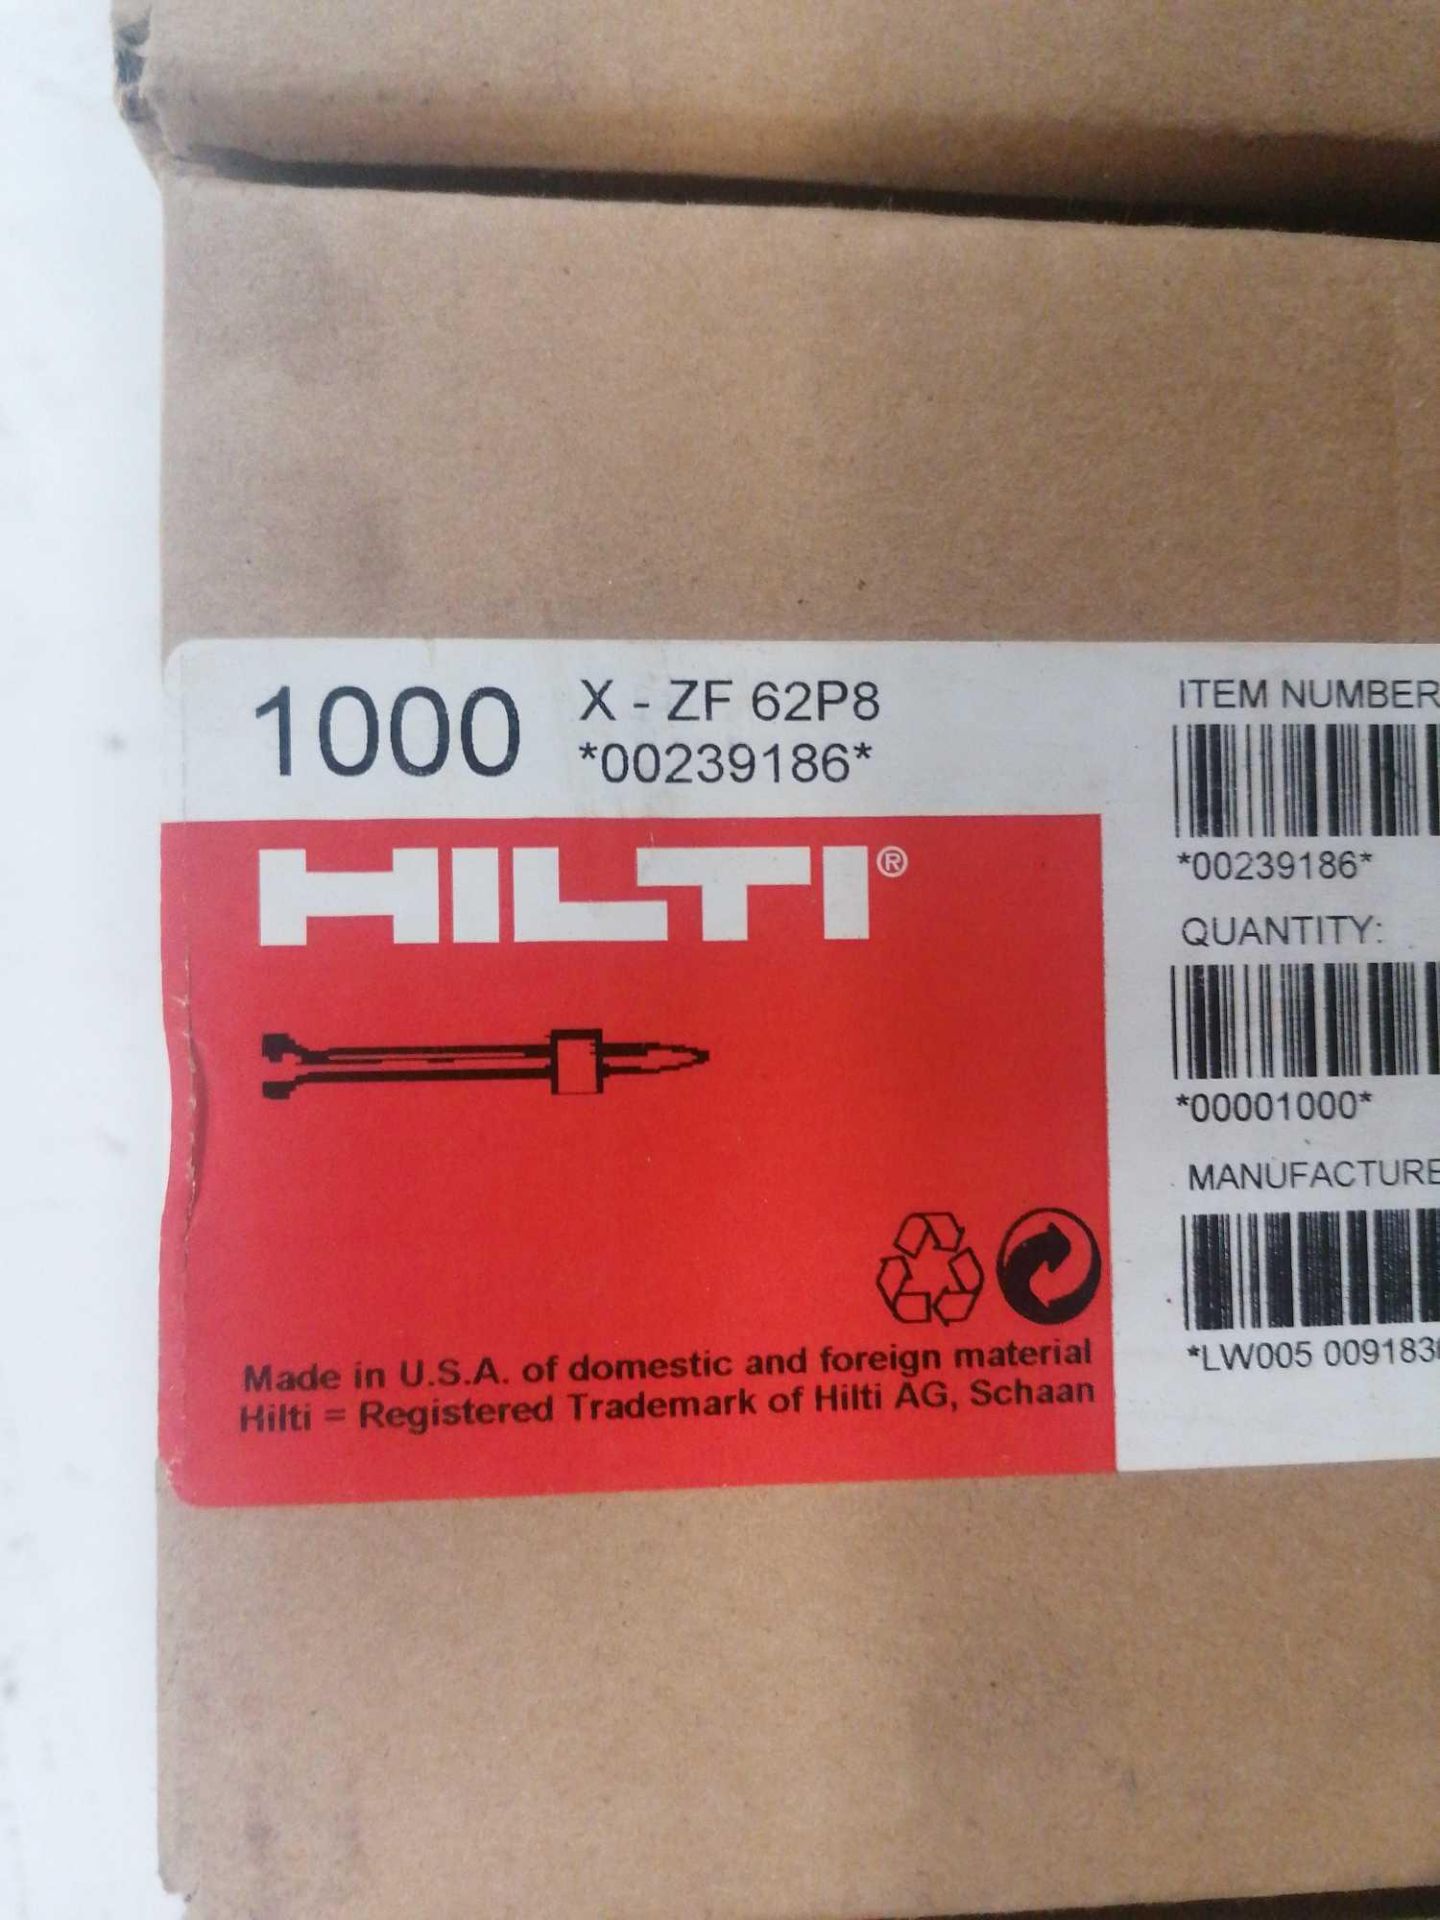 (2) Boxes of NEW Hilti 1000 x ZP 62P8 Fasteners - Image 2 of 2